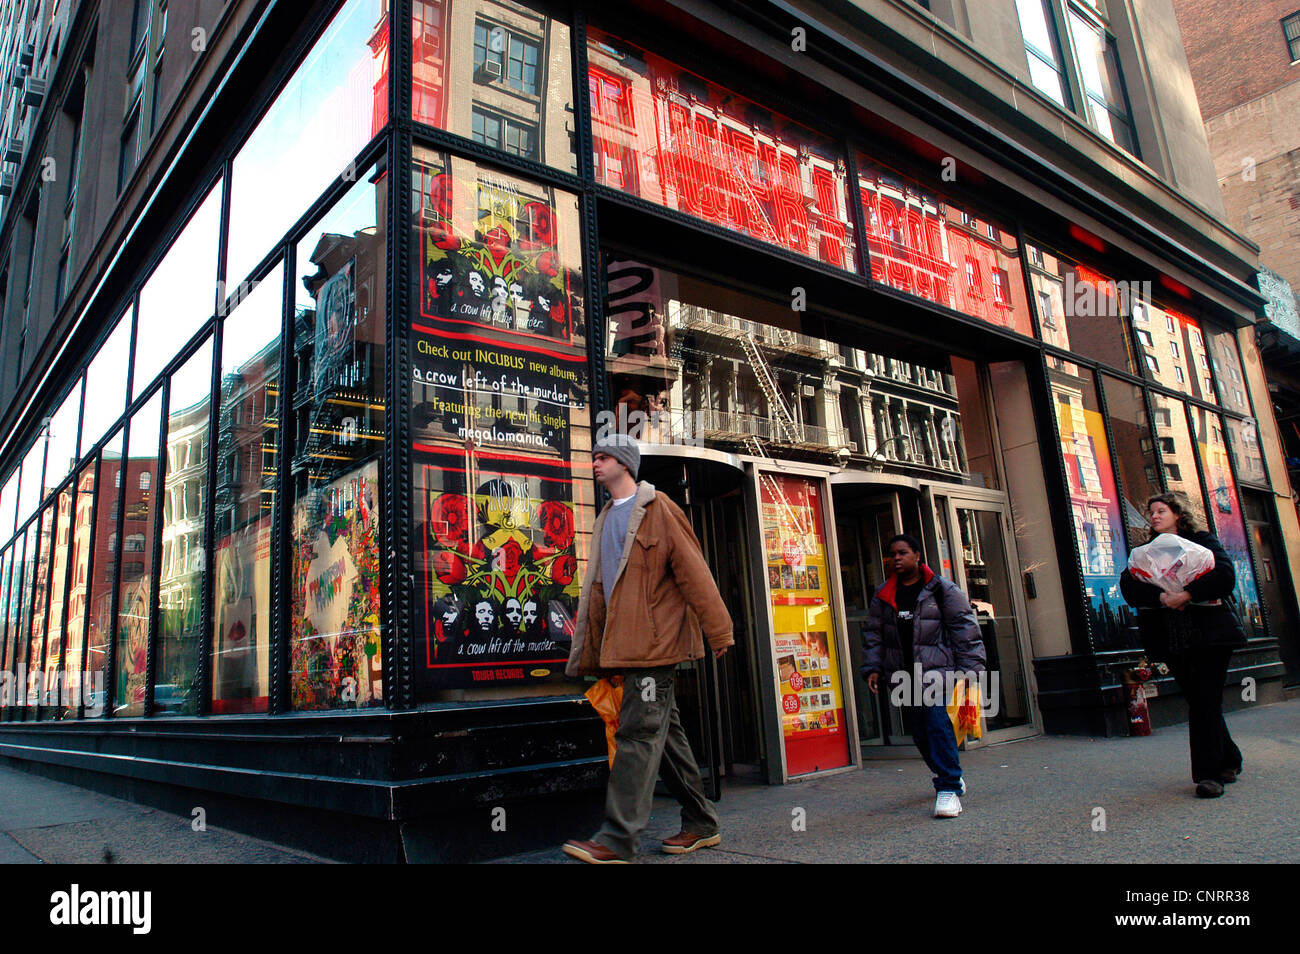 https://c8.alamy.com/comp/CNRR38/the-tower-records-store-in-greenwich-village-CNRR38.jpg